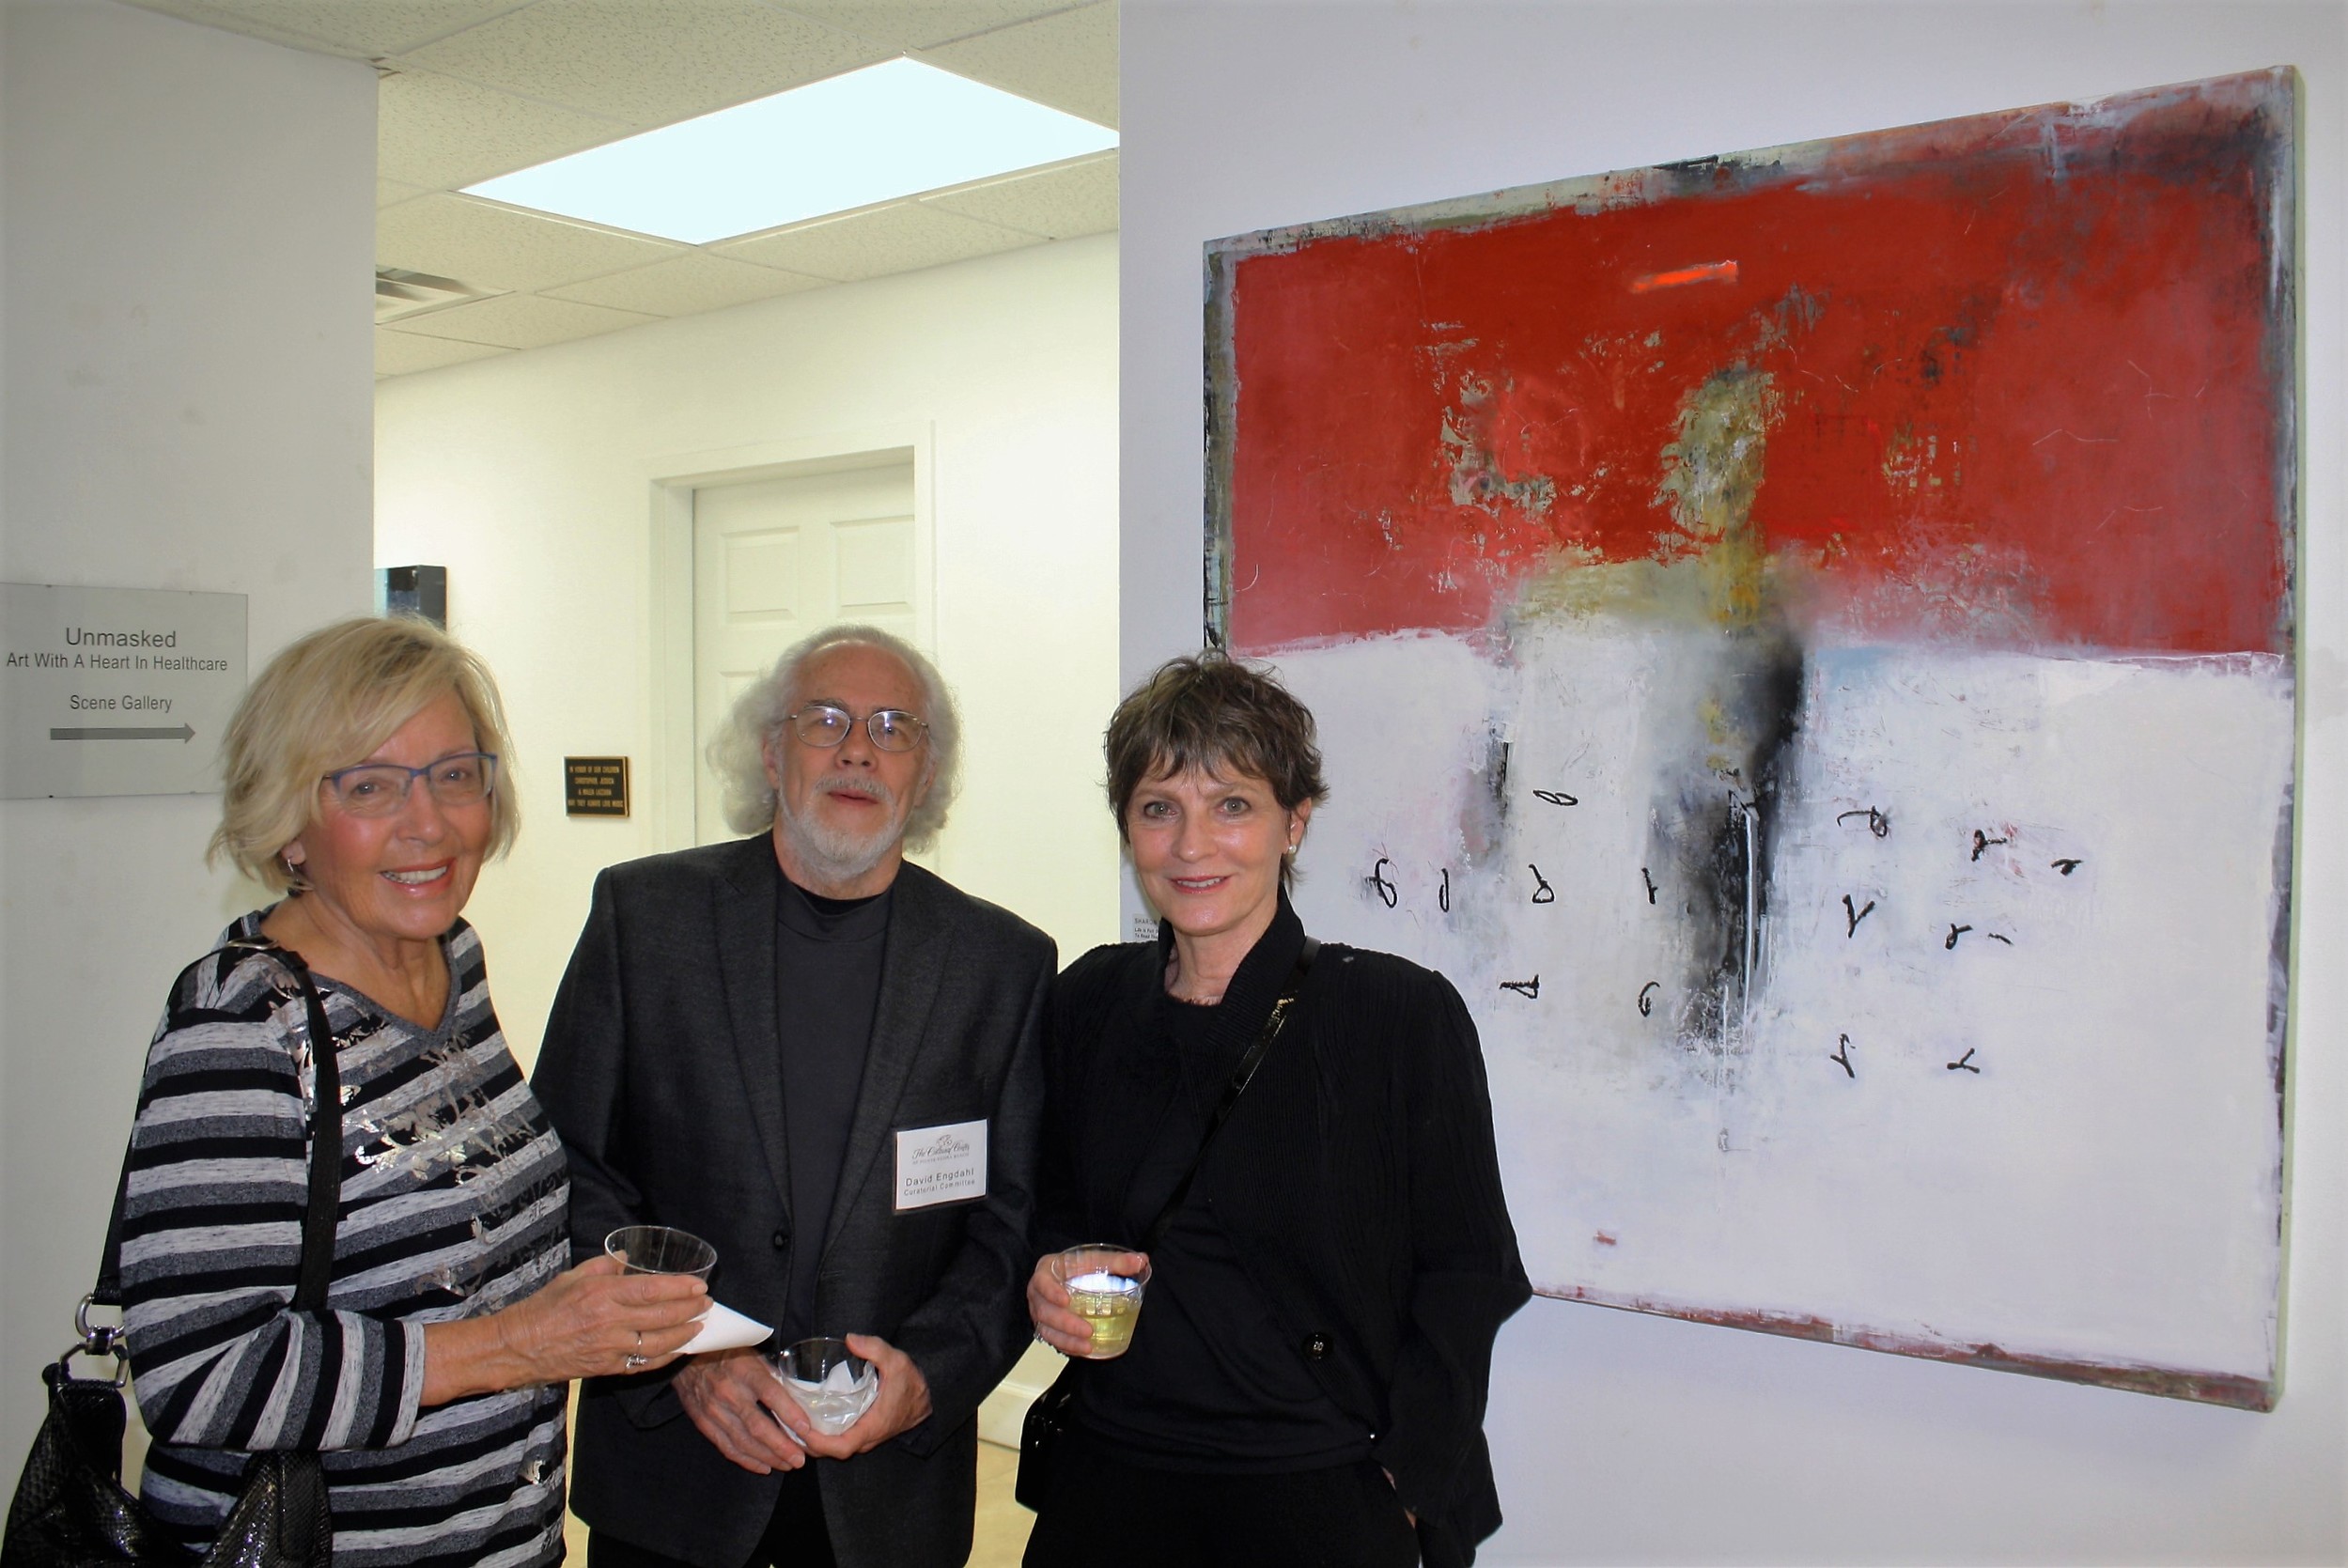 Gabrielle Van Zon, David Engdahl of the cultural center’s curatorial committee and Dita Domonkos with one of Sharon Booma’s works